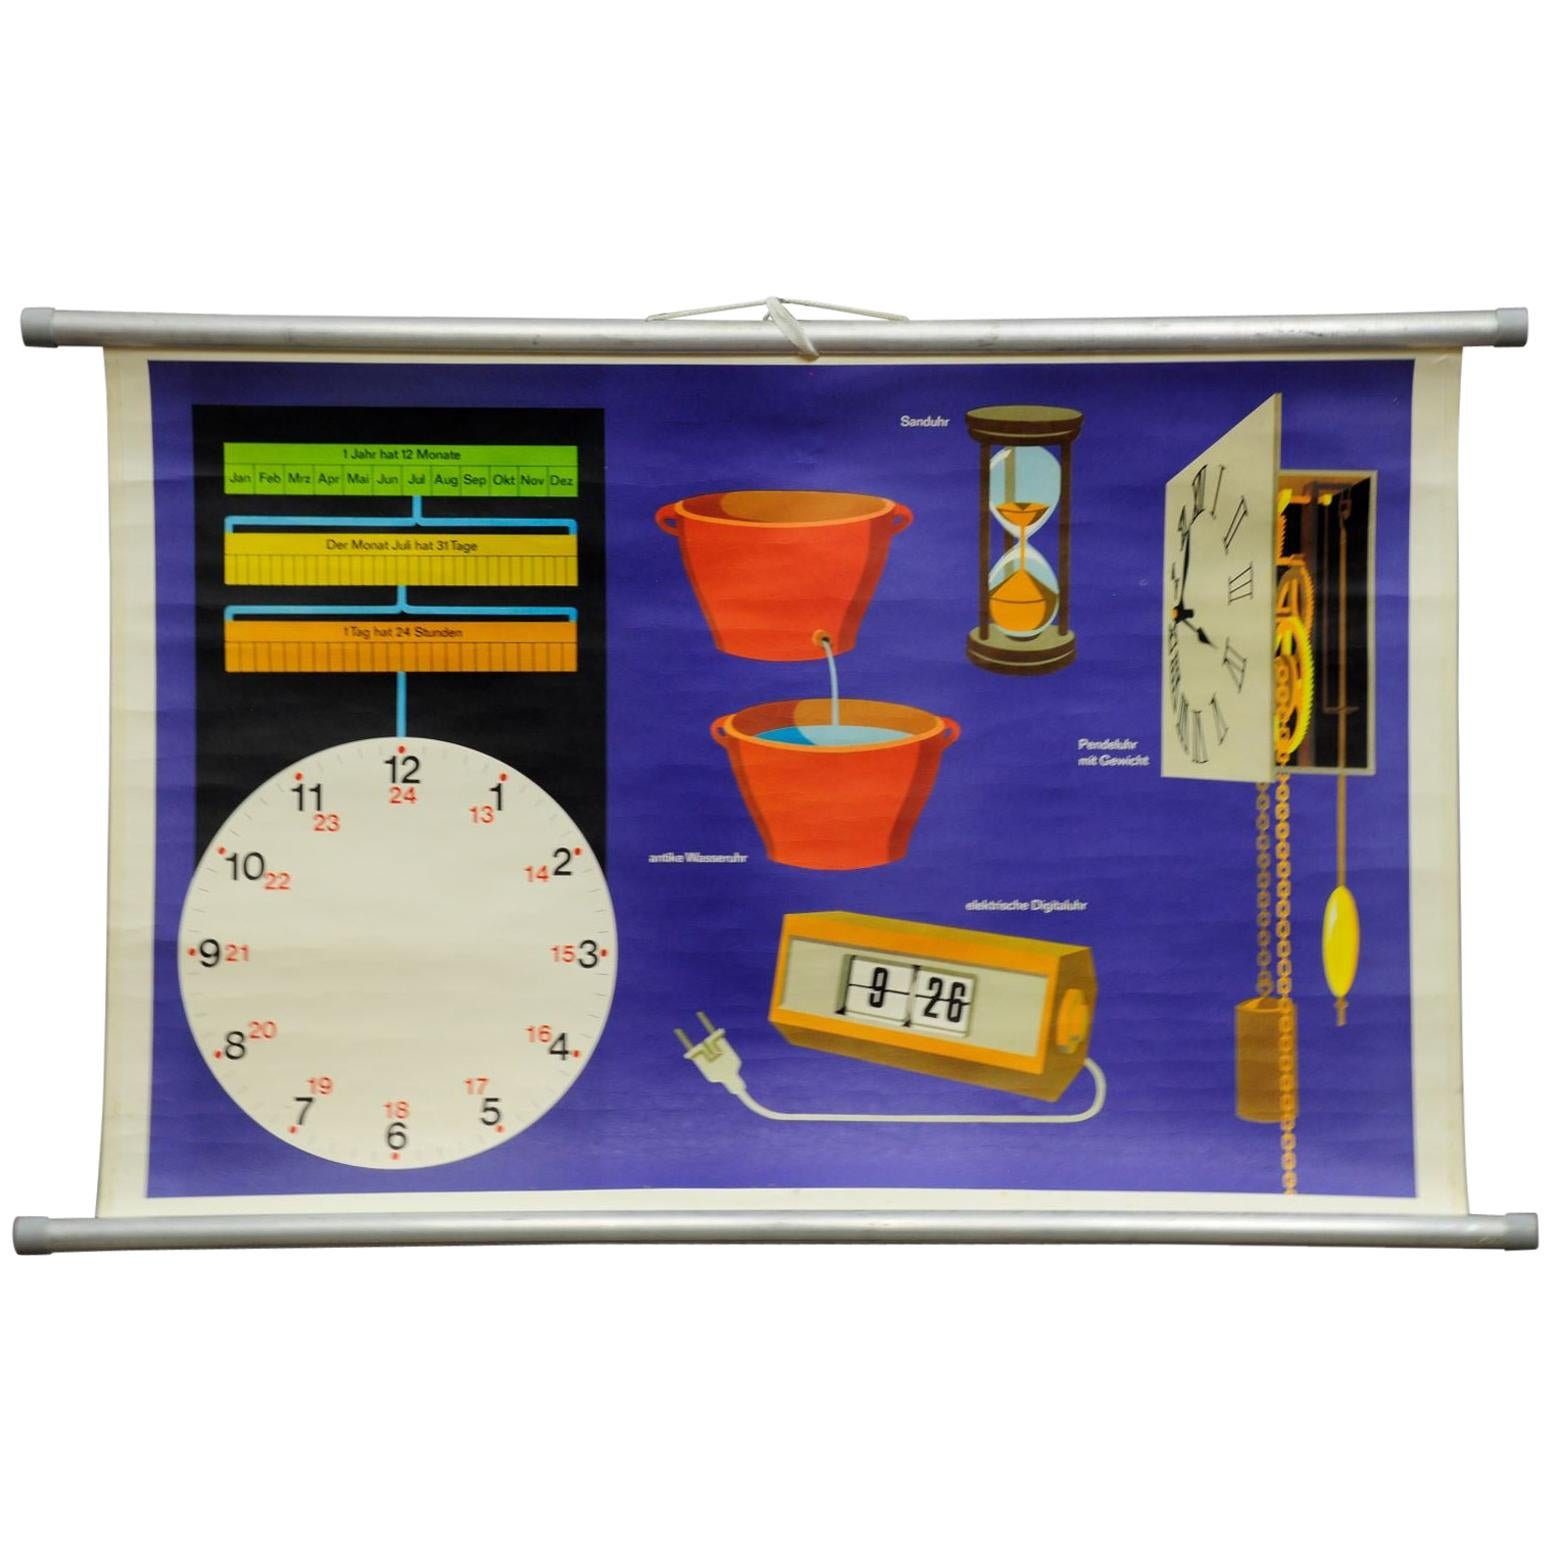 Vintage Pull Down Wall Chart about the Time Measurement